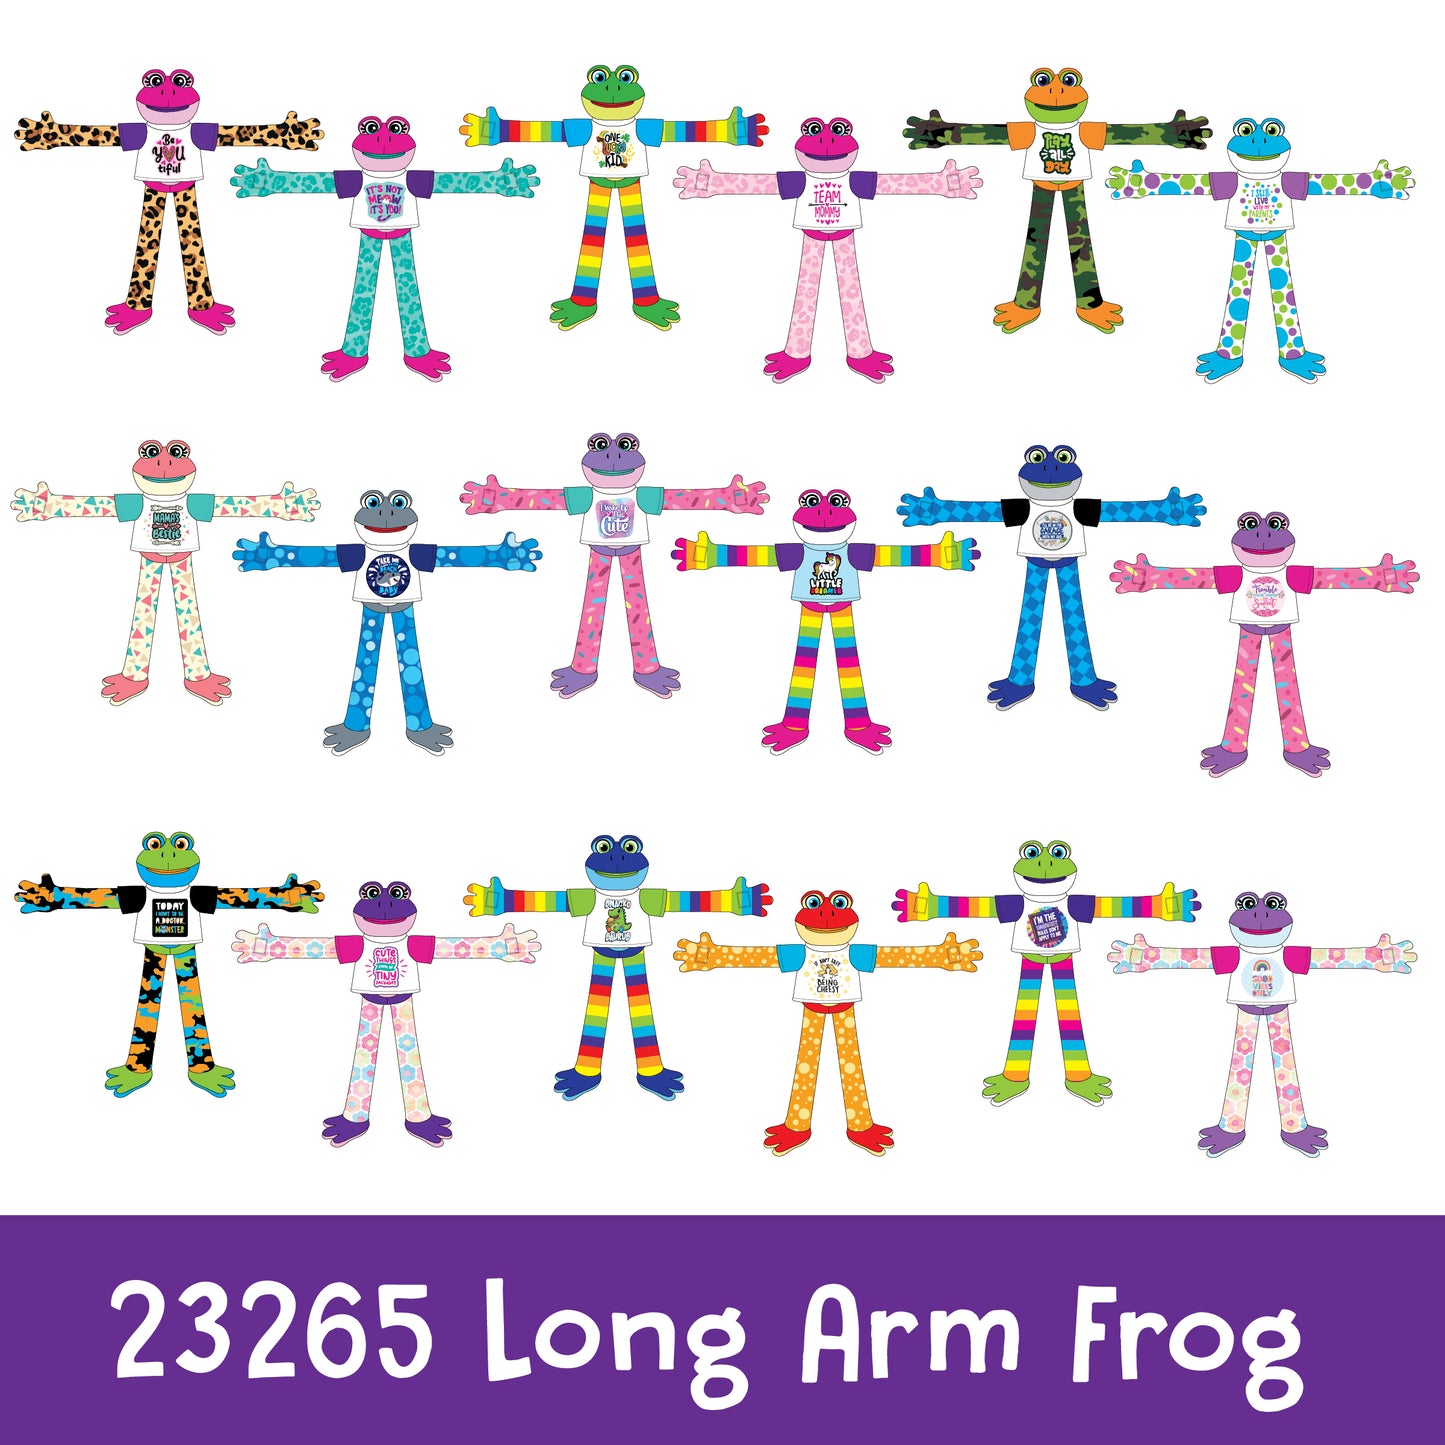 ITEM NUMBER 088275 LONG ARM FROGS B1 FD 39 PIECES PER DISPLAY